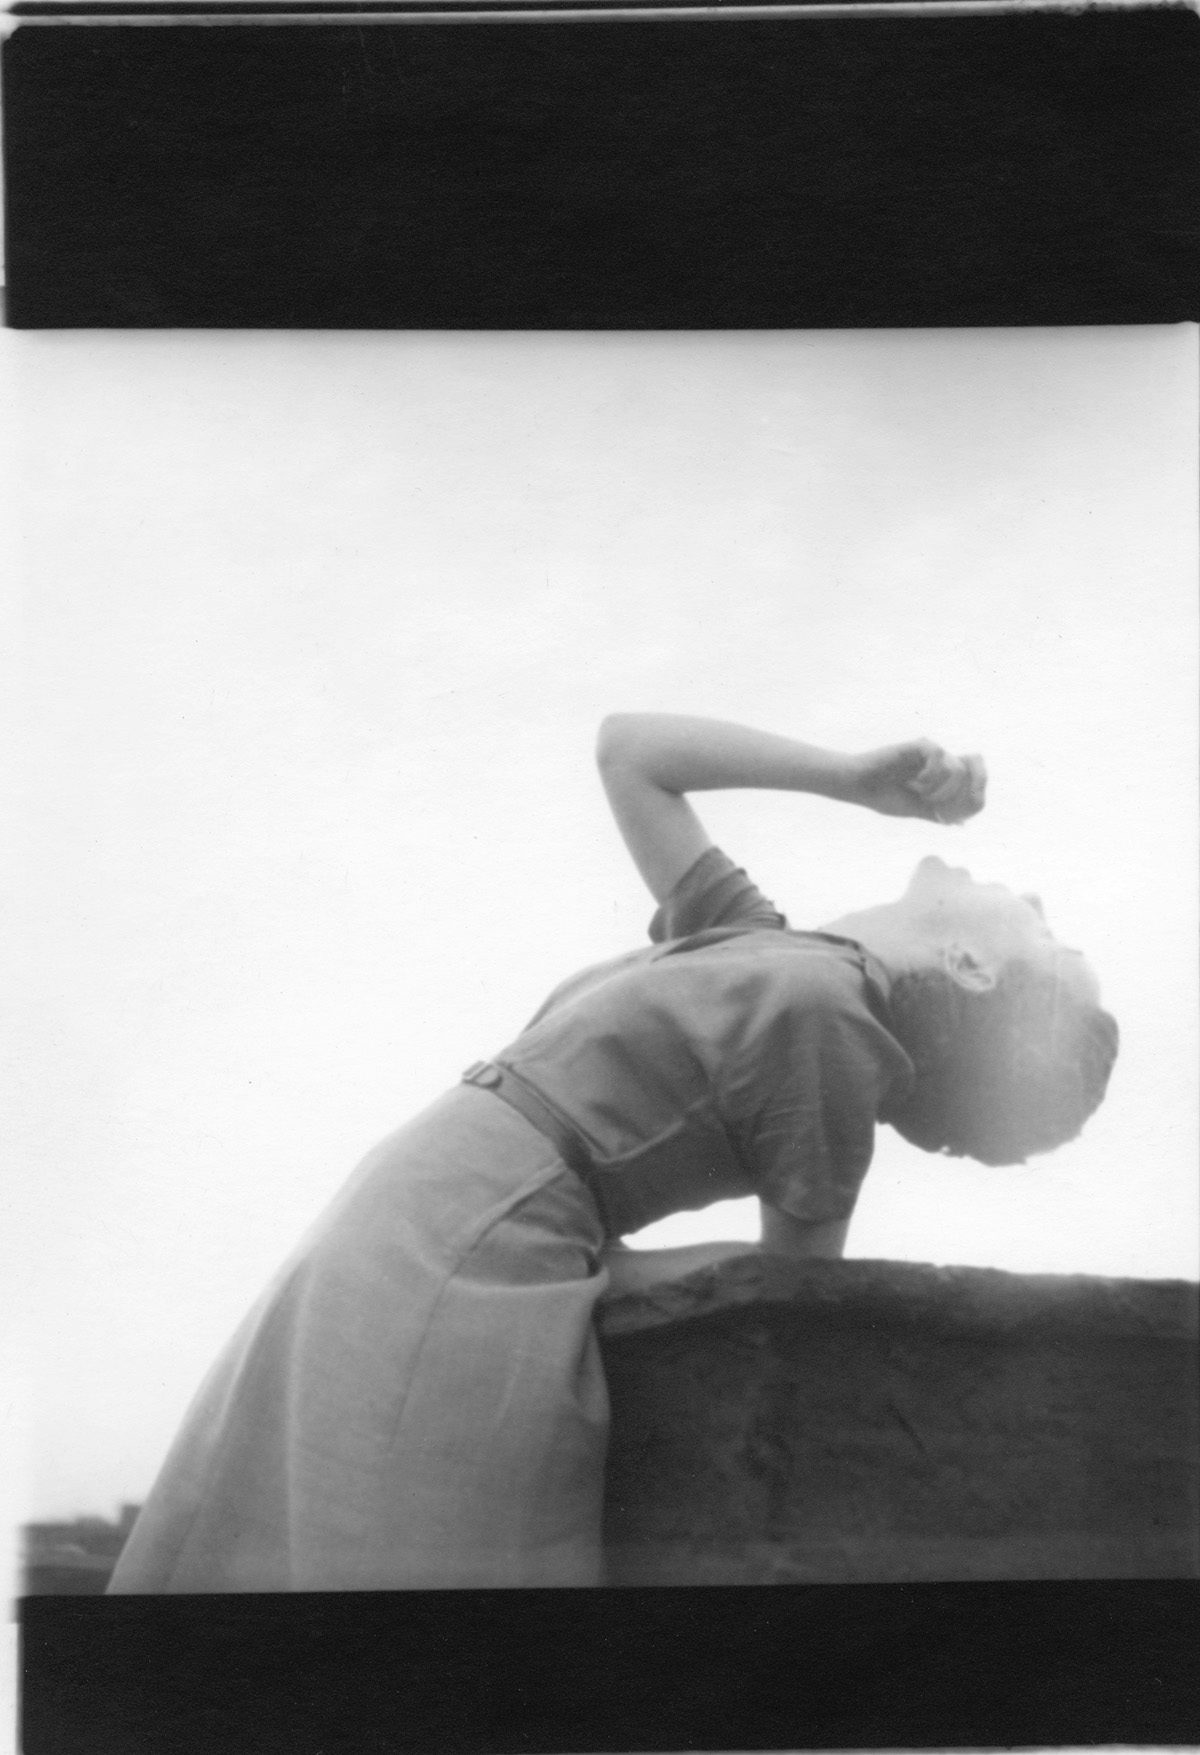 Black and white photograph by Saul Leiter showing a person with short hair wearing a dress and bending over backwards leaning up to the sky